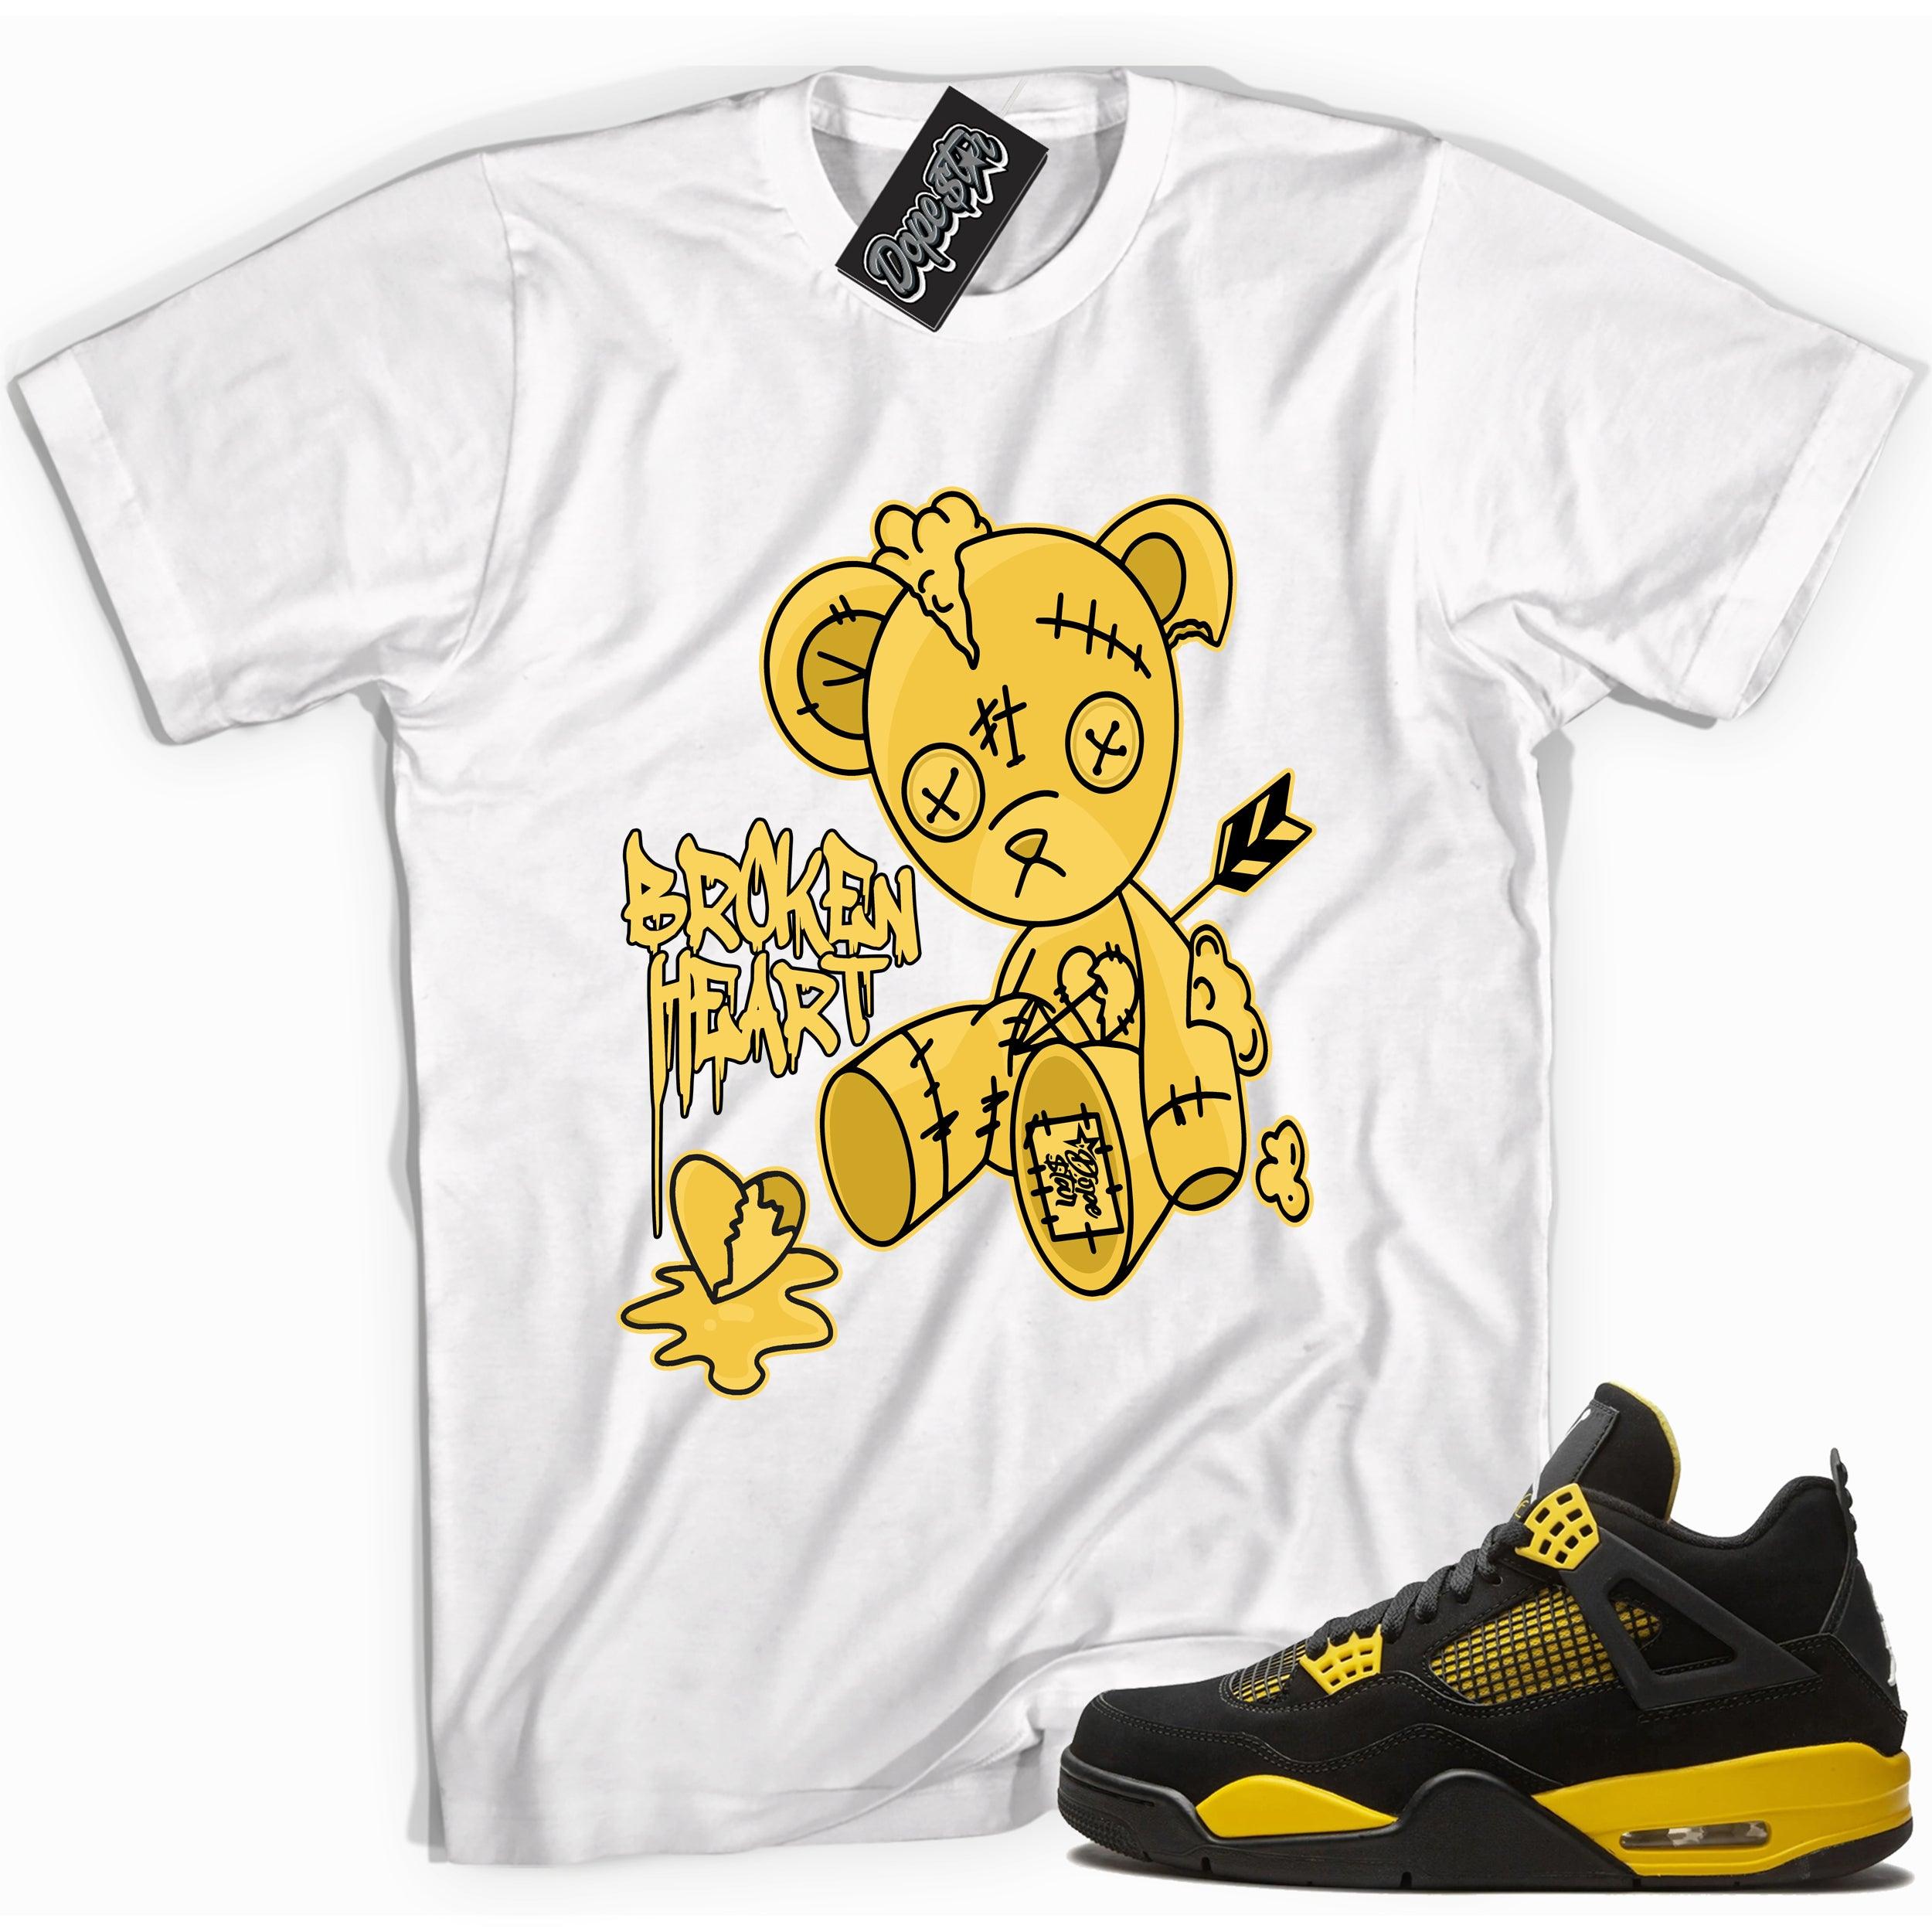 Cool white graphic tee with 'broken heart bear' print, that perfectly matches Air Jordan 4 Thunder sneakers